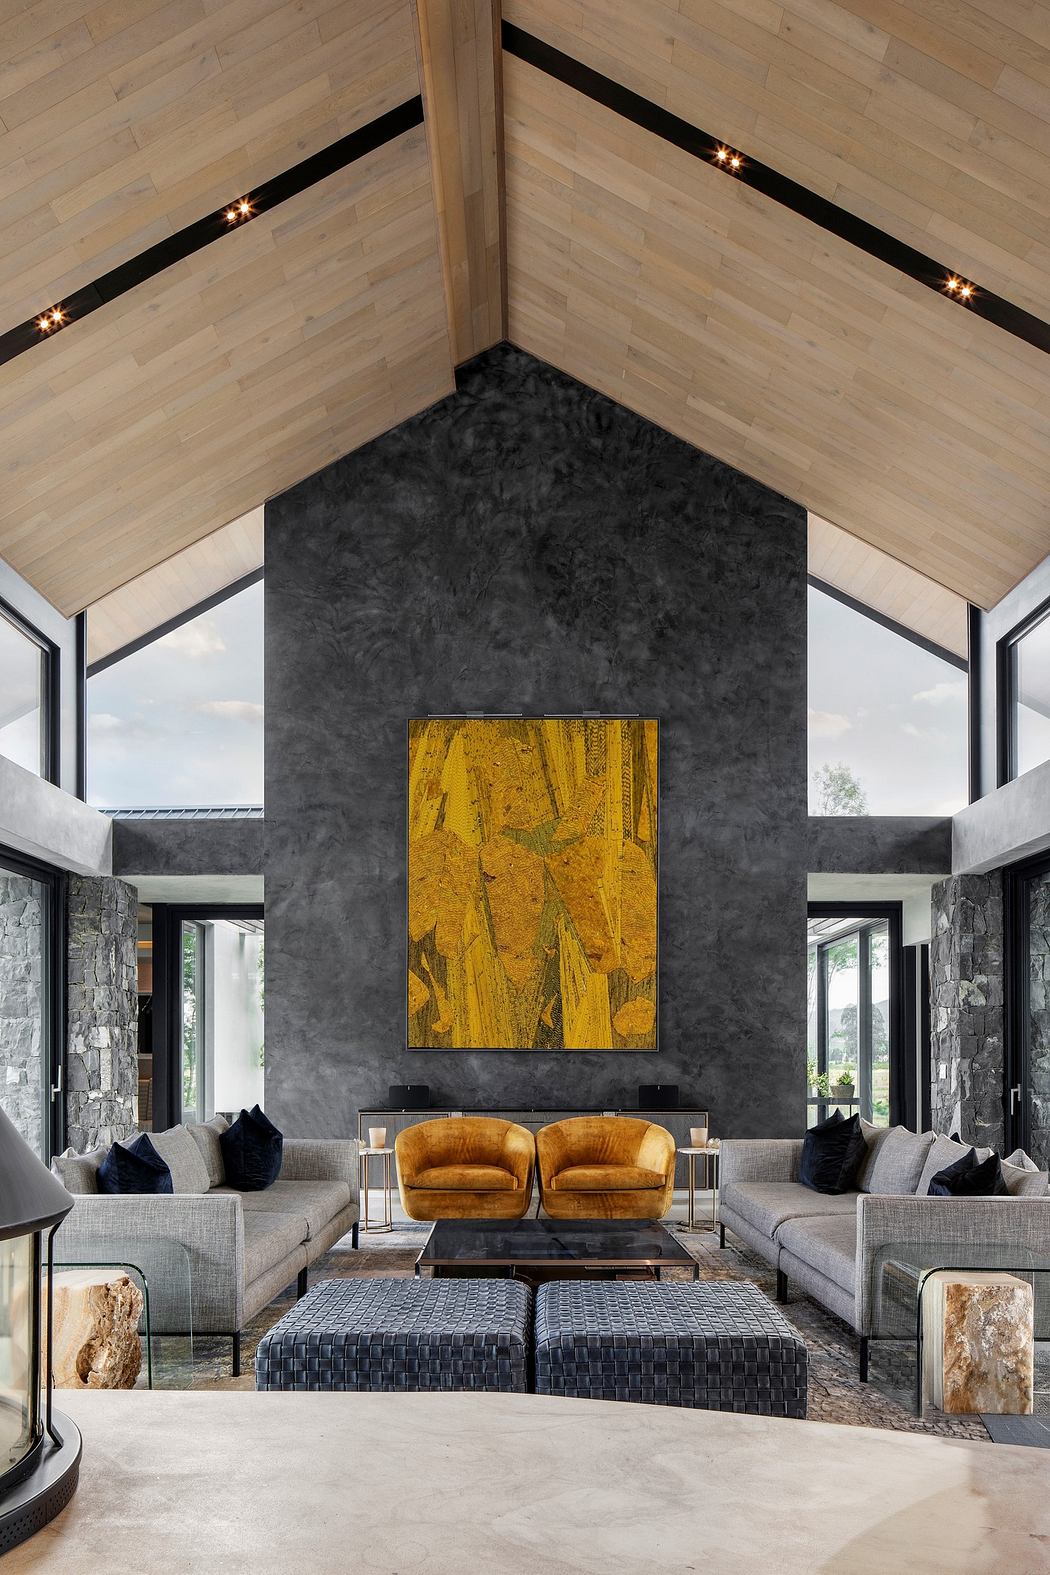 Modern living room with high ceilings, gray walls, and a bold art piece.